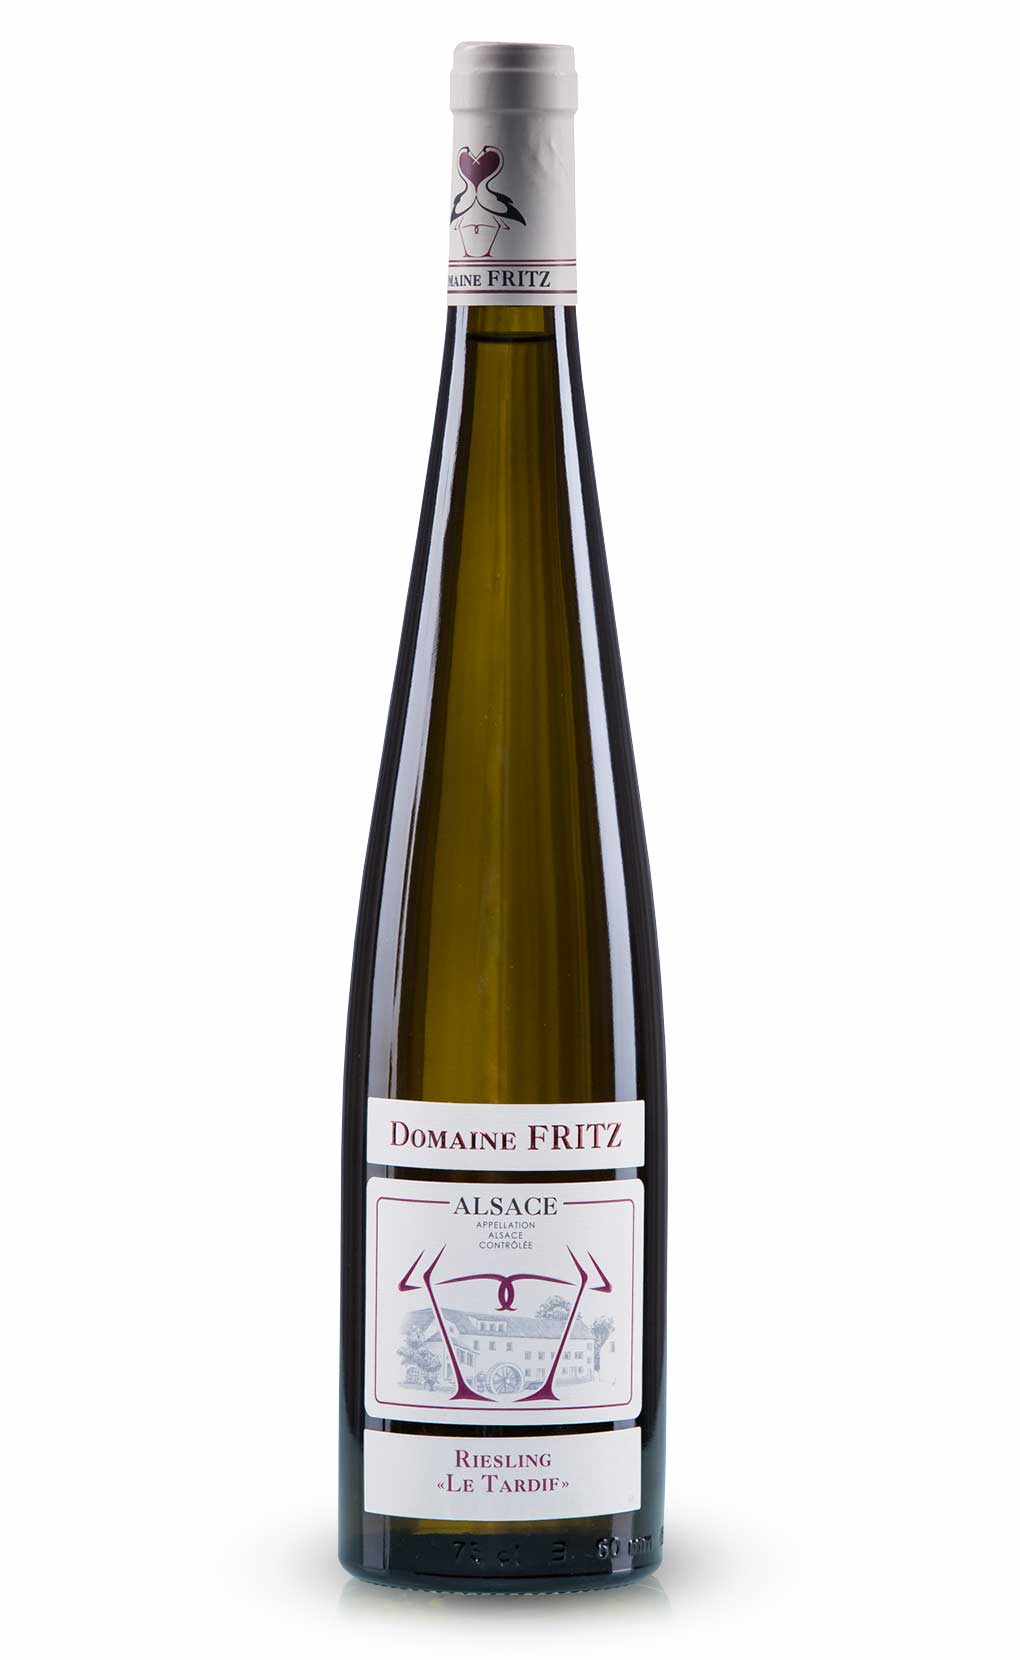 riesling-le-tardif-2016